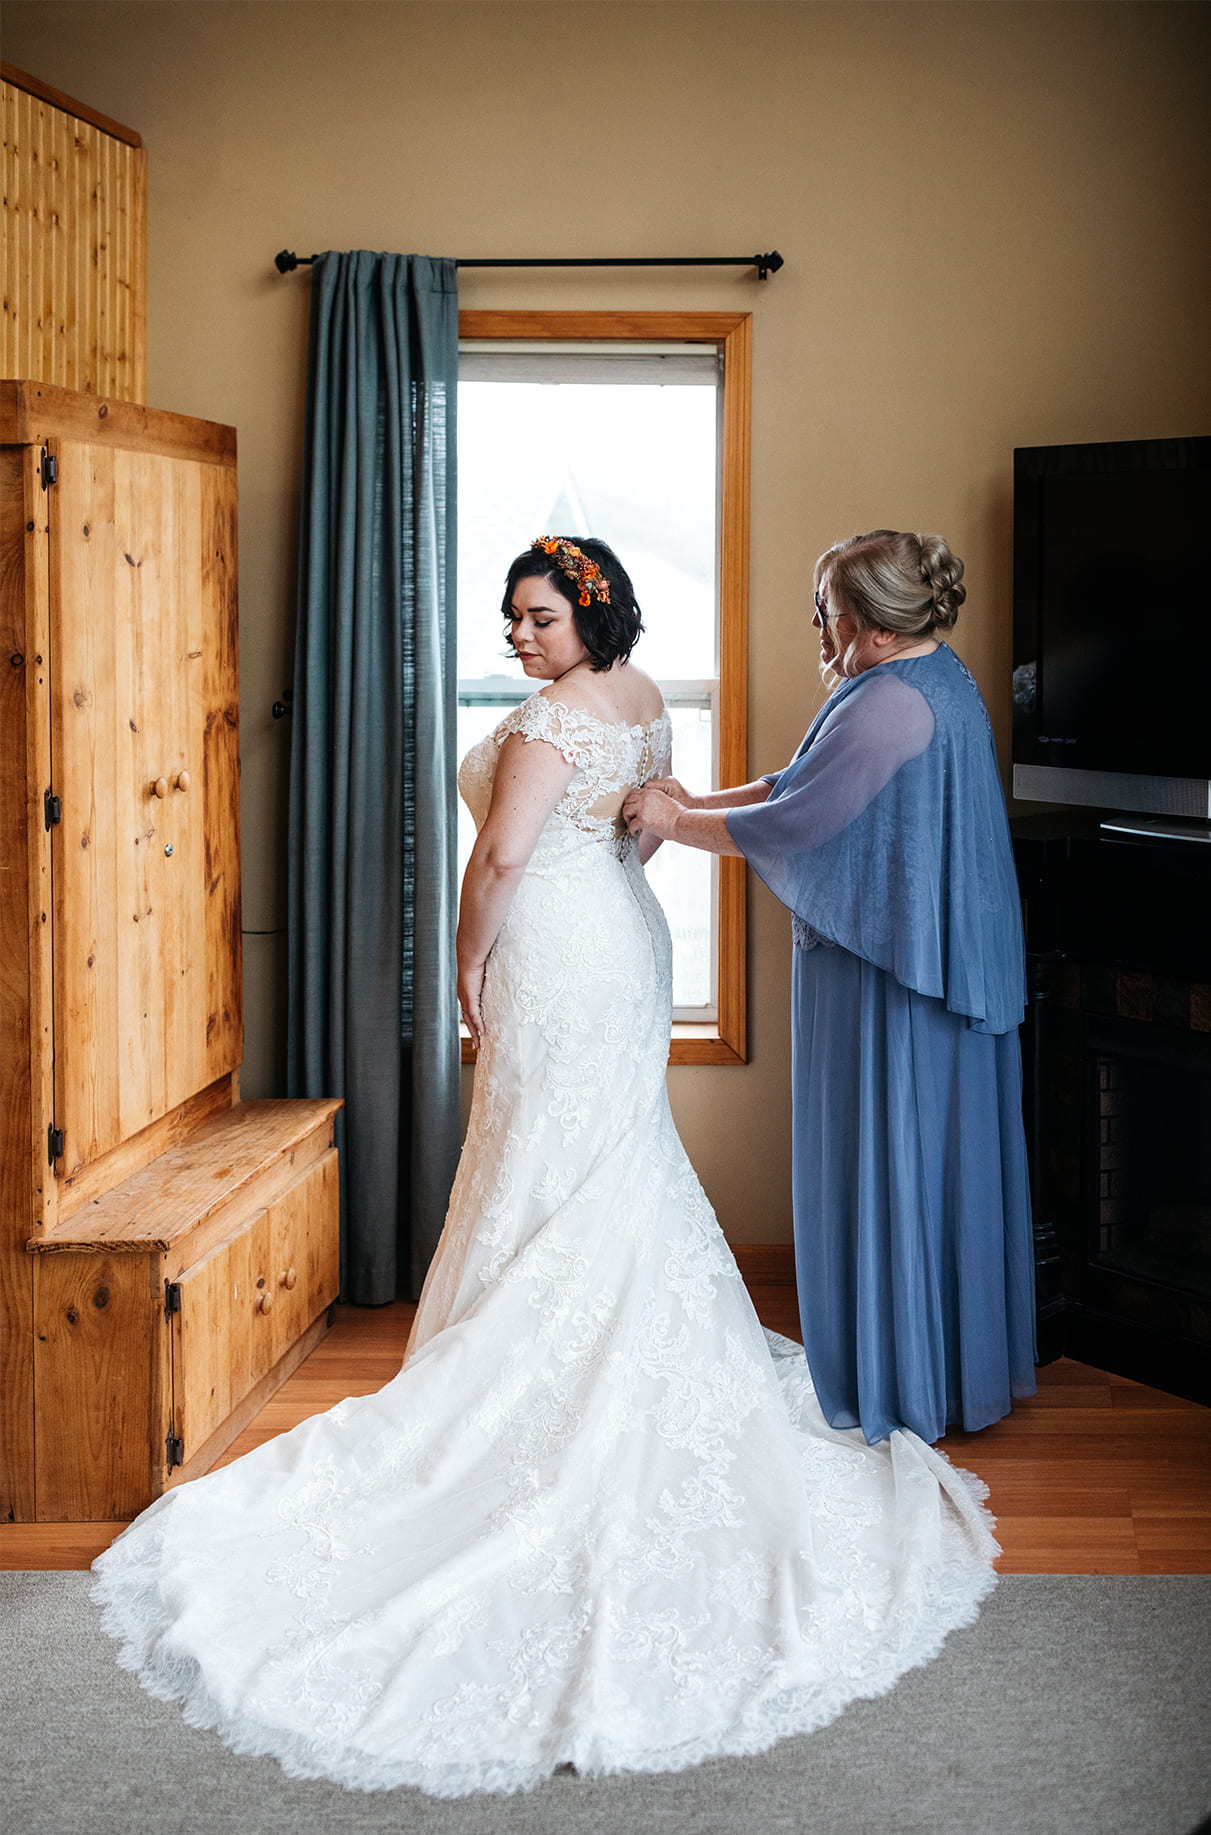 Bride stands while mom zips up the back of her dress